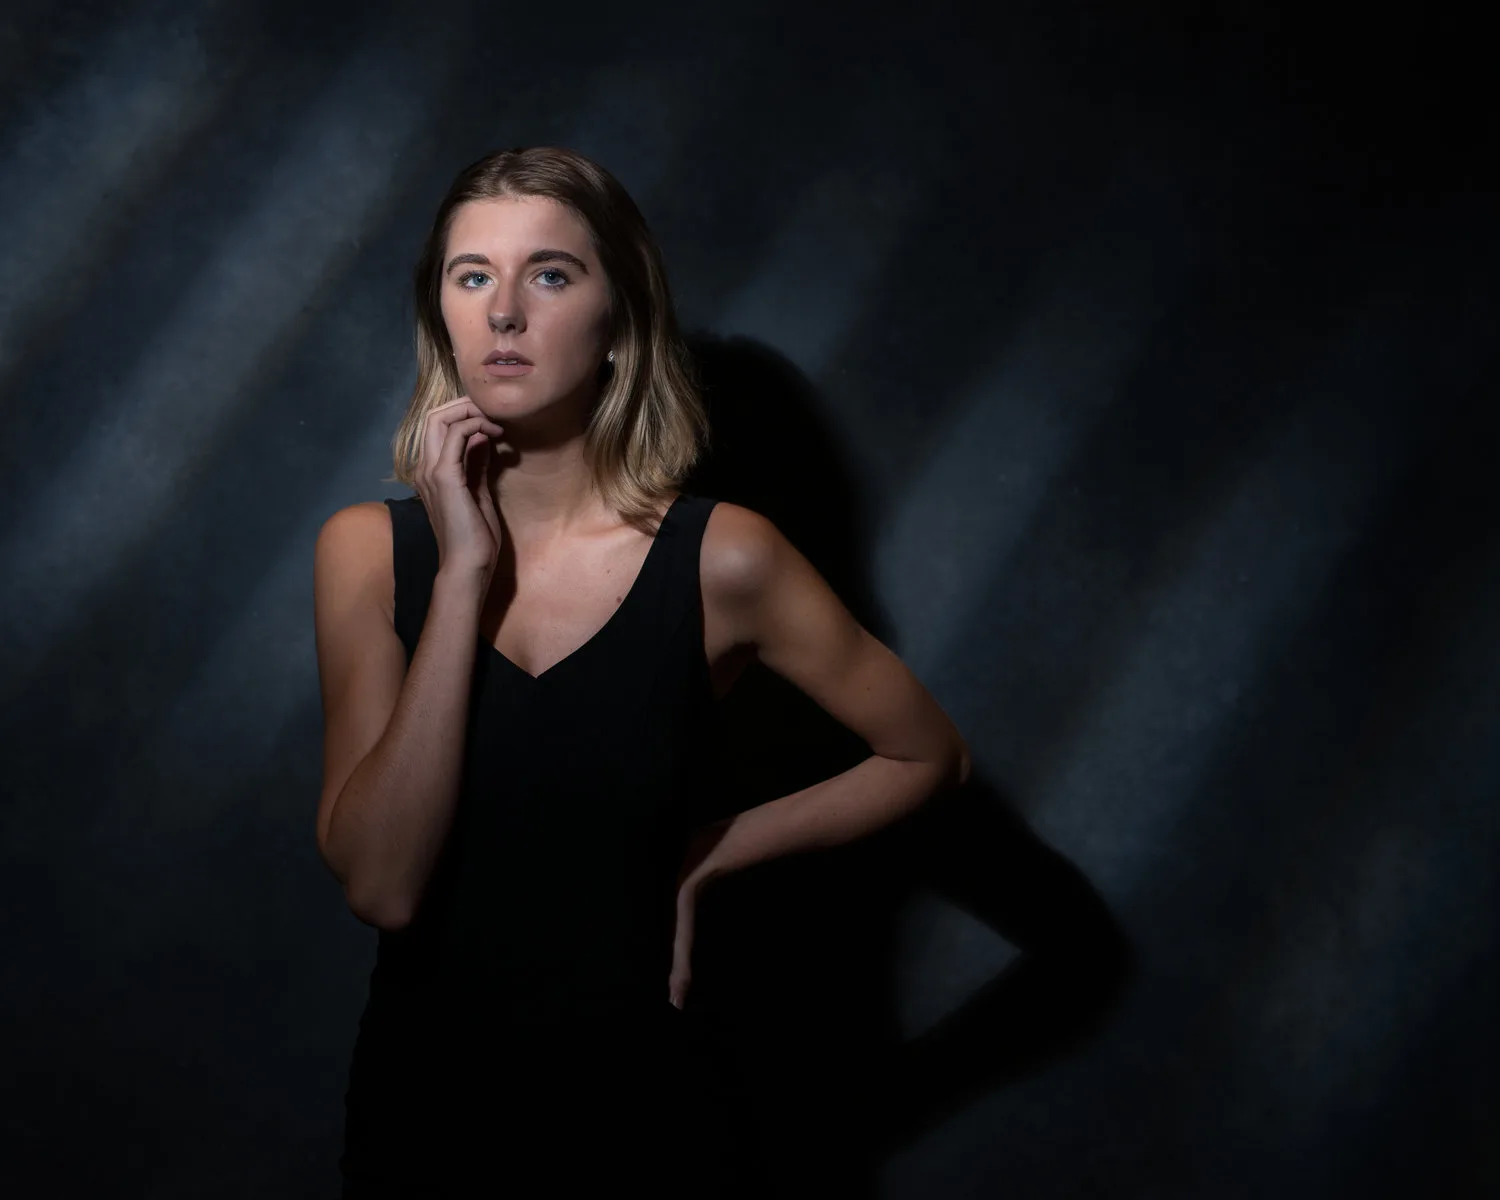 Elegant woman in black attire posing with a contemplative expression against a textured, dark background, captured by a Chester County personal branding photographer specializing in business and personal brand photoshoots.